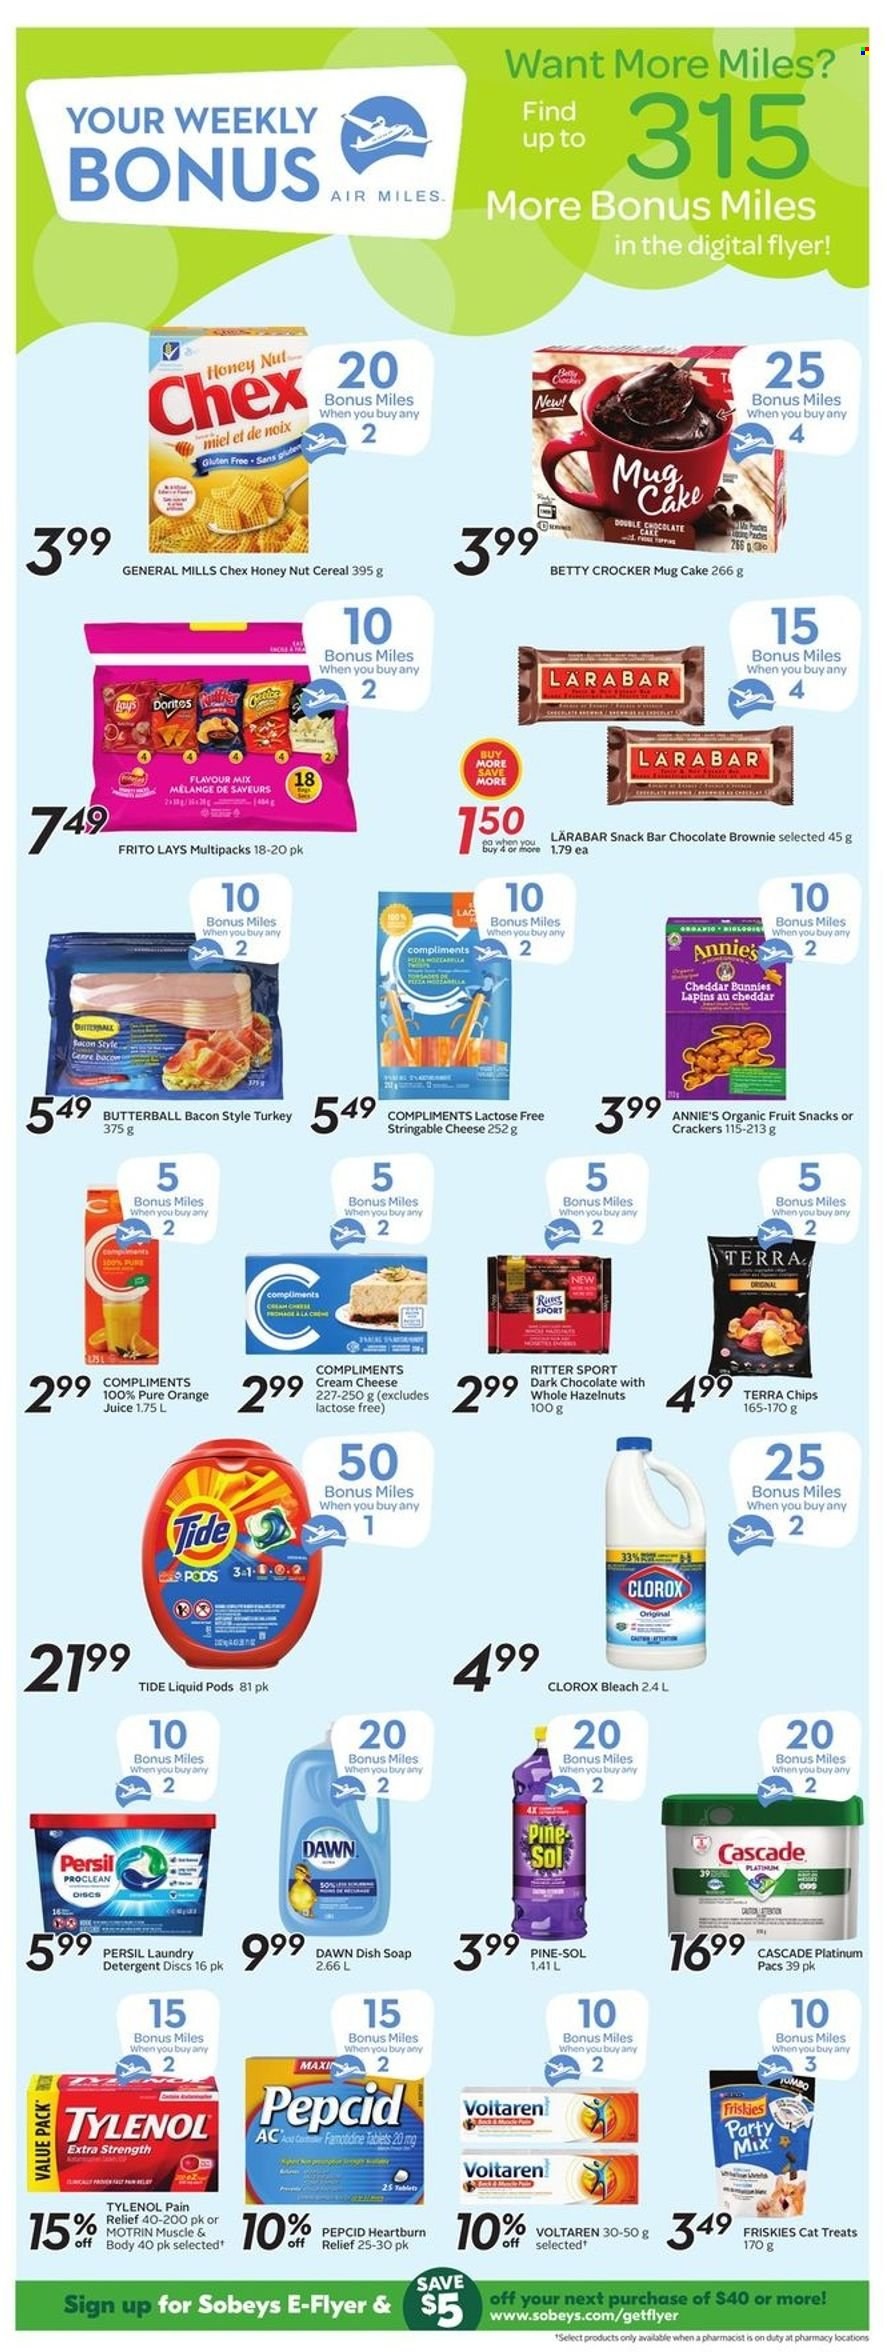 thumbnail - Sobeys Flyer - January 13, 2022 - January 19, 2022 - Sales products - cake, brownies, Annie's, bacon, Butterball, cream cheese, chocolate, crackers, dark chocolate, Ritter Sport, fruit snack, snack bar, Lay’s, cereals, hazelnuts, juice, bleach, Clorox, Pine-Sol, Tide, Persil, laundry detergent, Cascade, soap, Friskies, pain relief, Tylenol, Pepcid, Motrin, detergent, chips, oranges. Page 14.